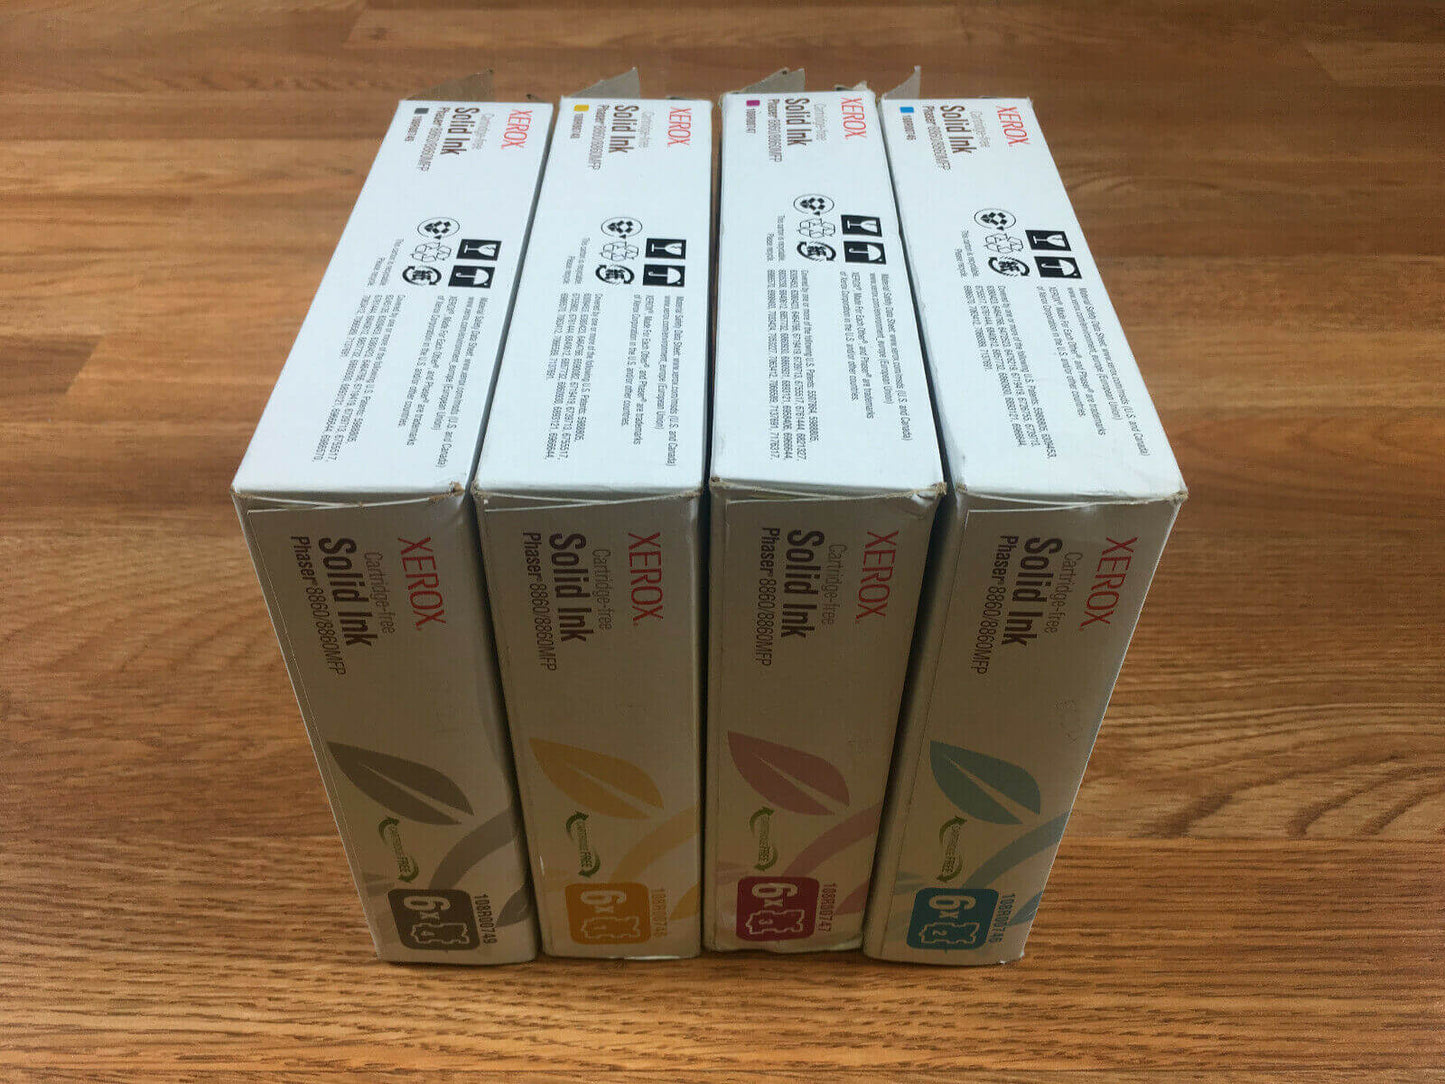 Open Box Xerox Phaser 8860 - 8860MFP CMYK Ink 108R00746-49 - FedEx 2Day Air!! - copier-clearance-center